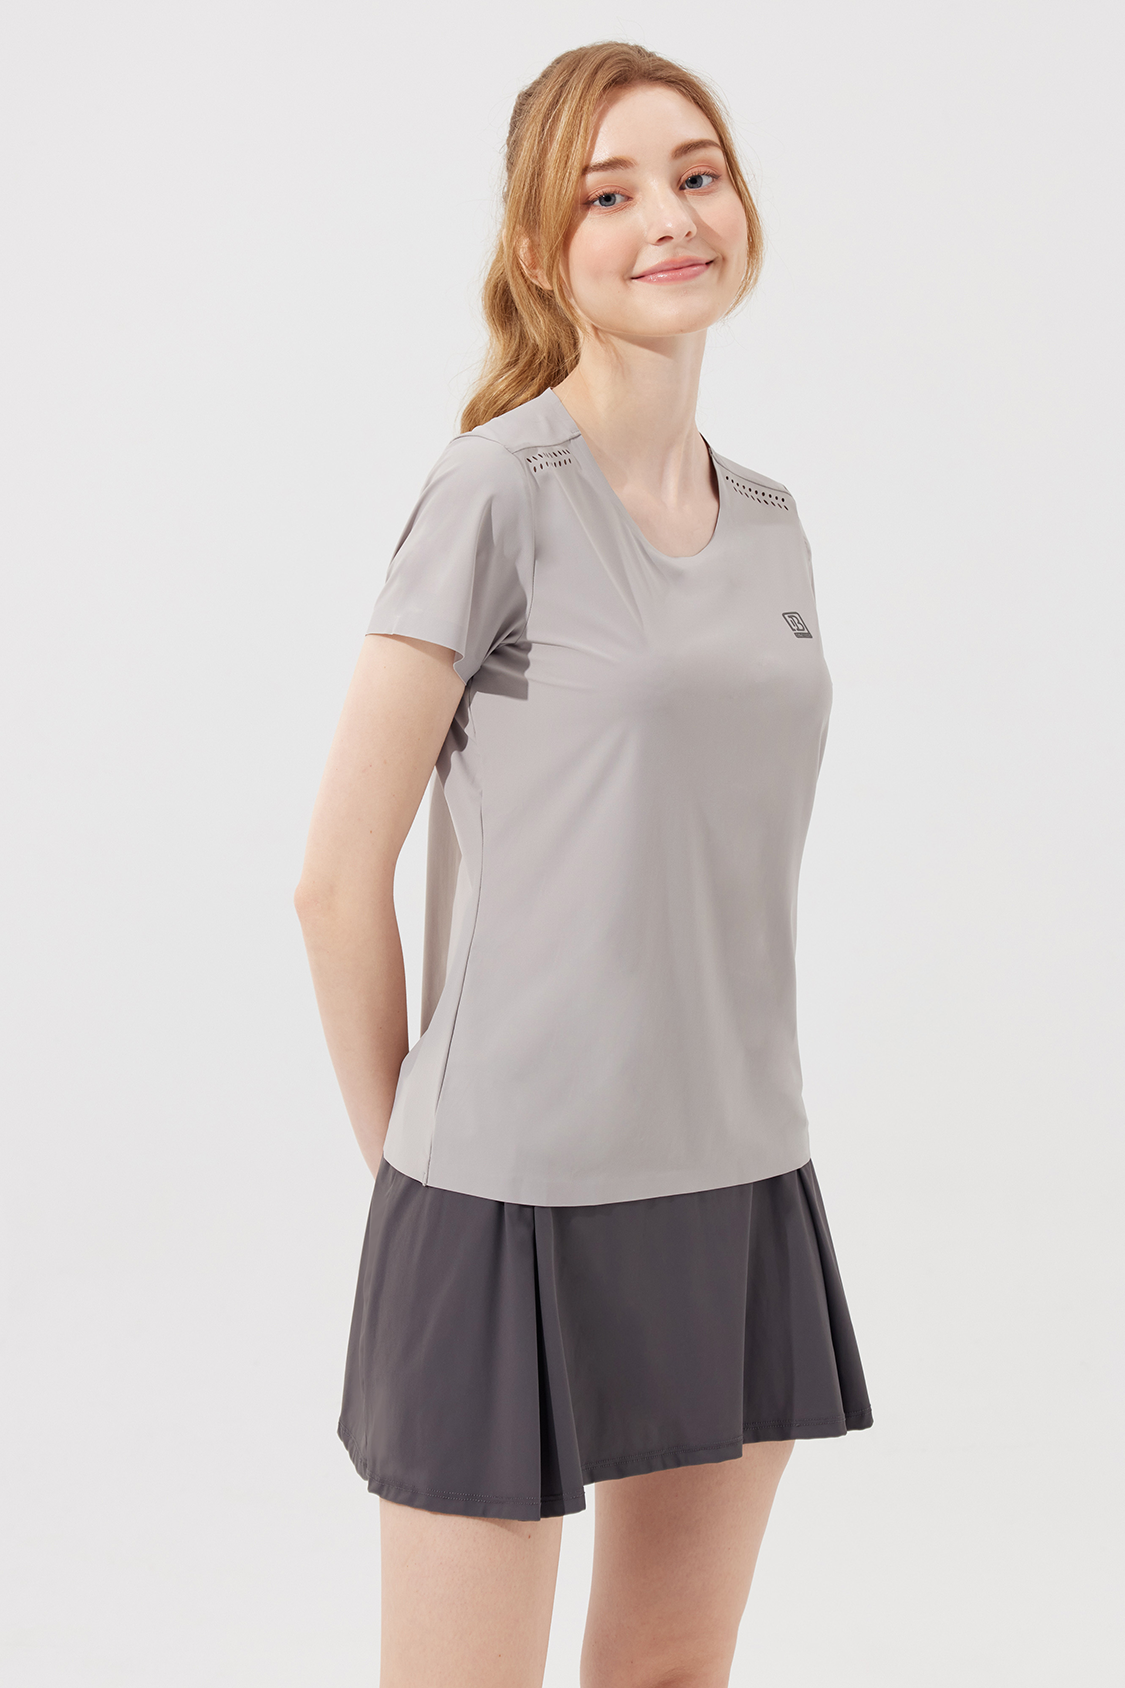 Ice-Tech Premium Seamless Breathable Heat-Pressed T-Shirt For Women